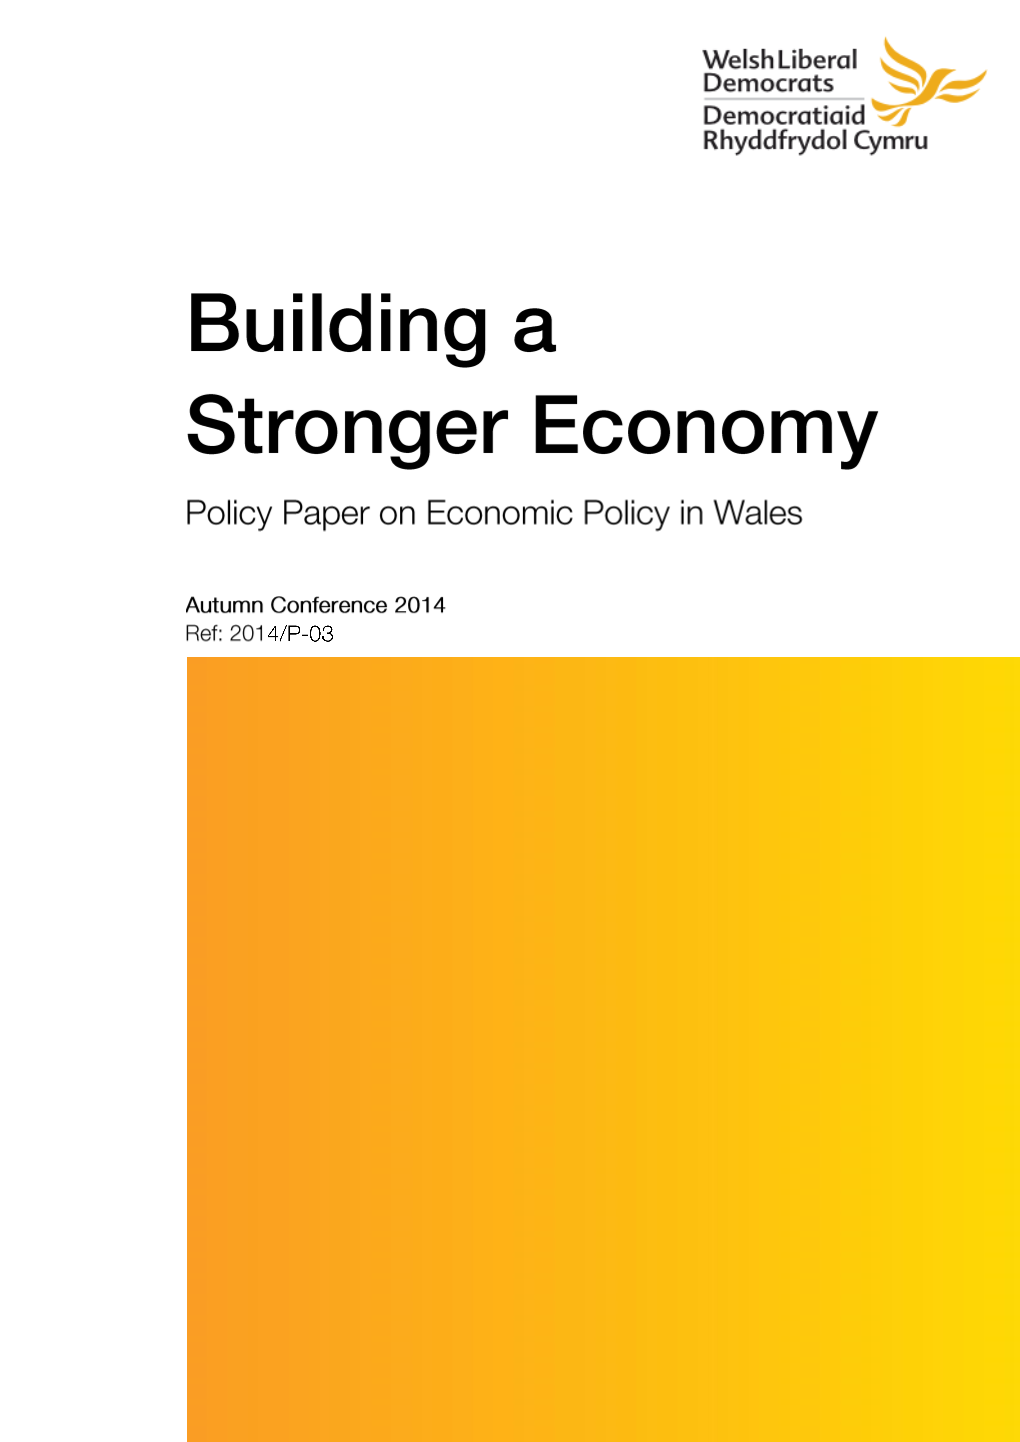 Building a Stronger Economy